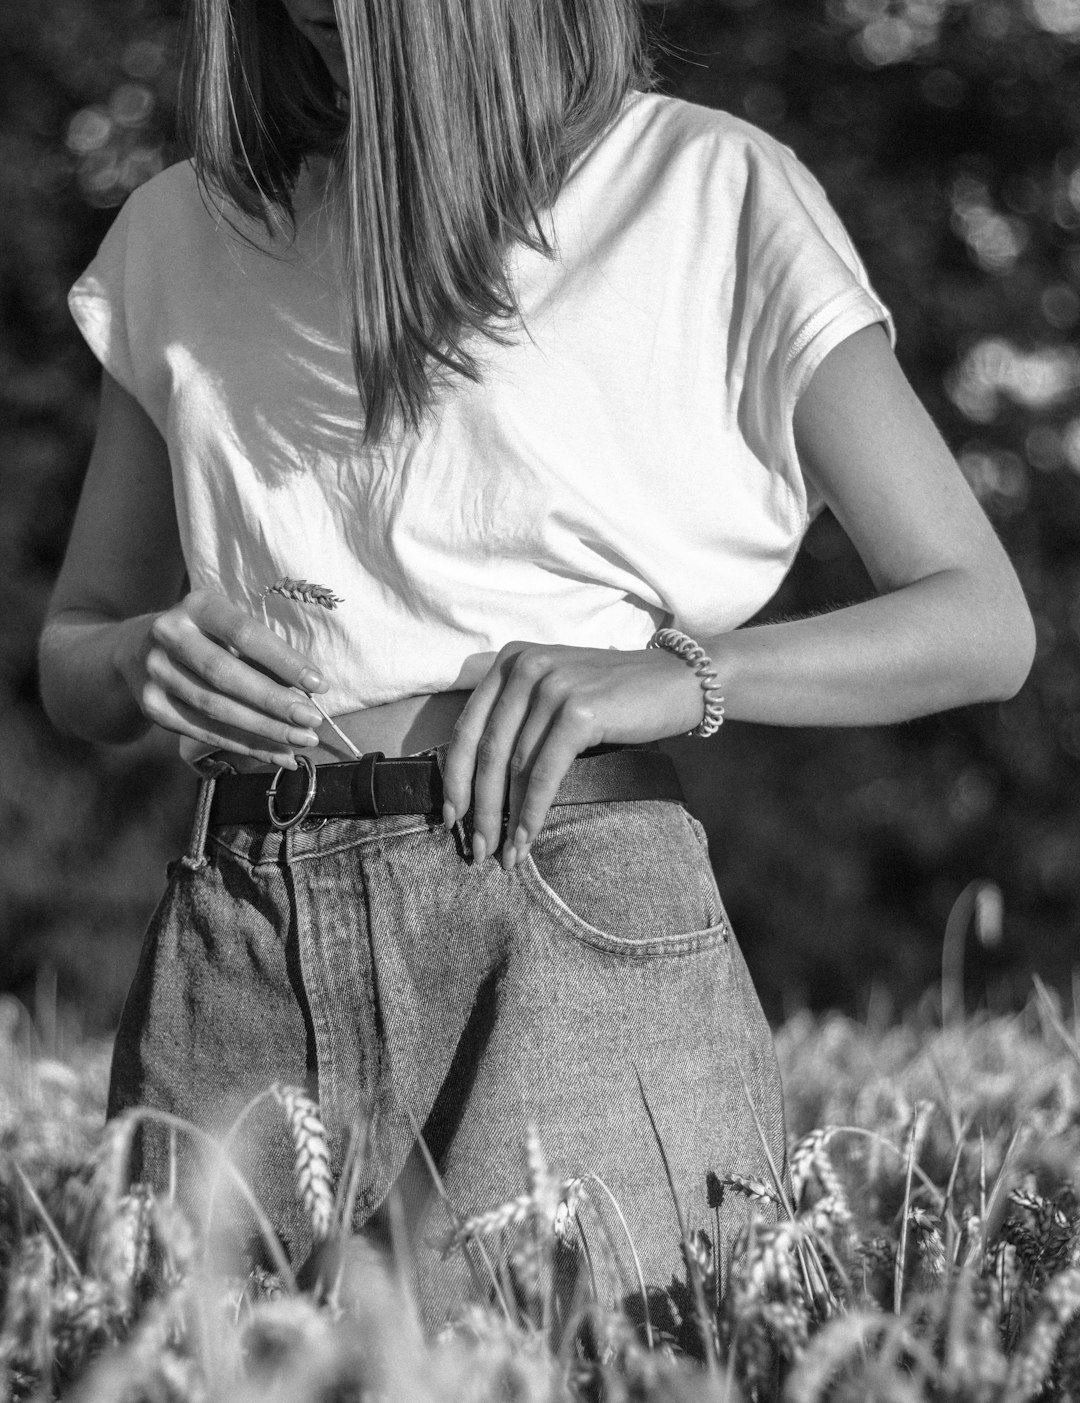 woman in white t-shirt and blue denim daisy dukes standing on grass field